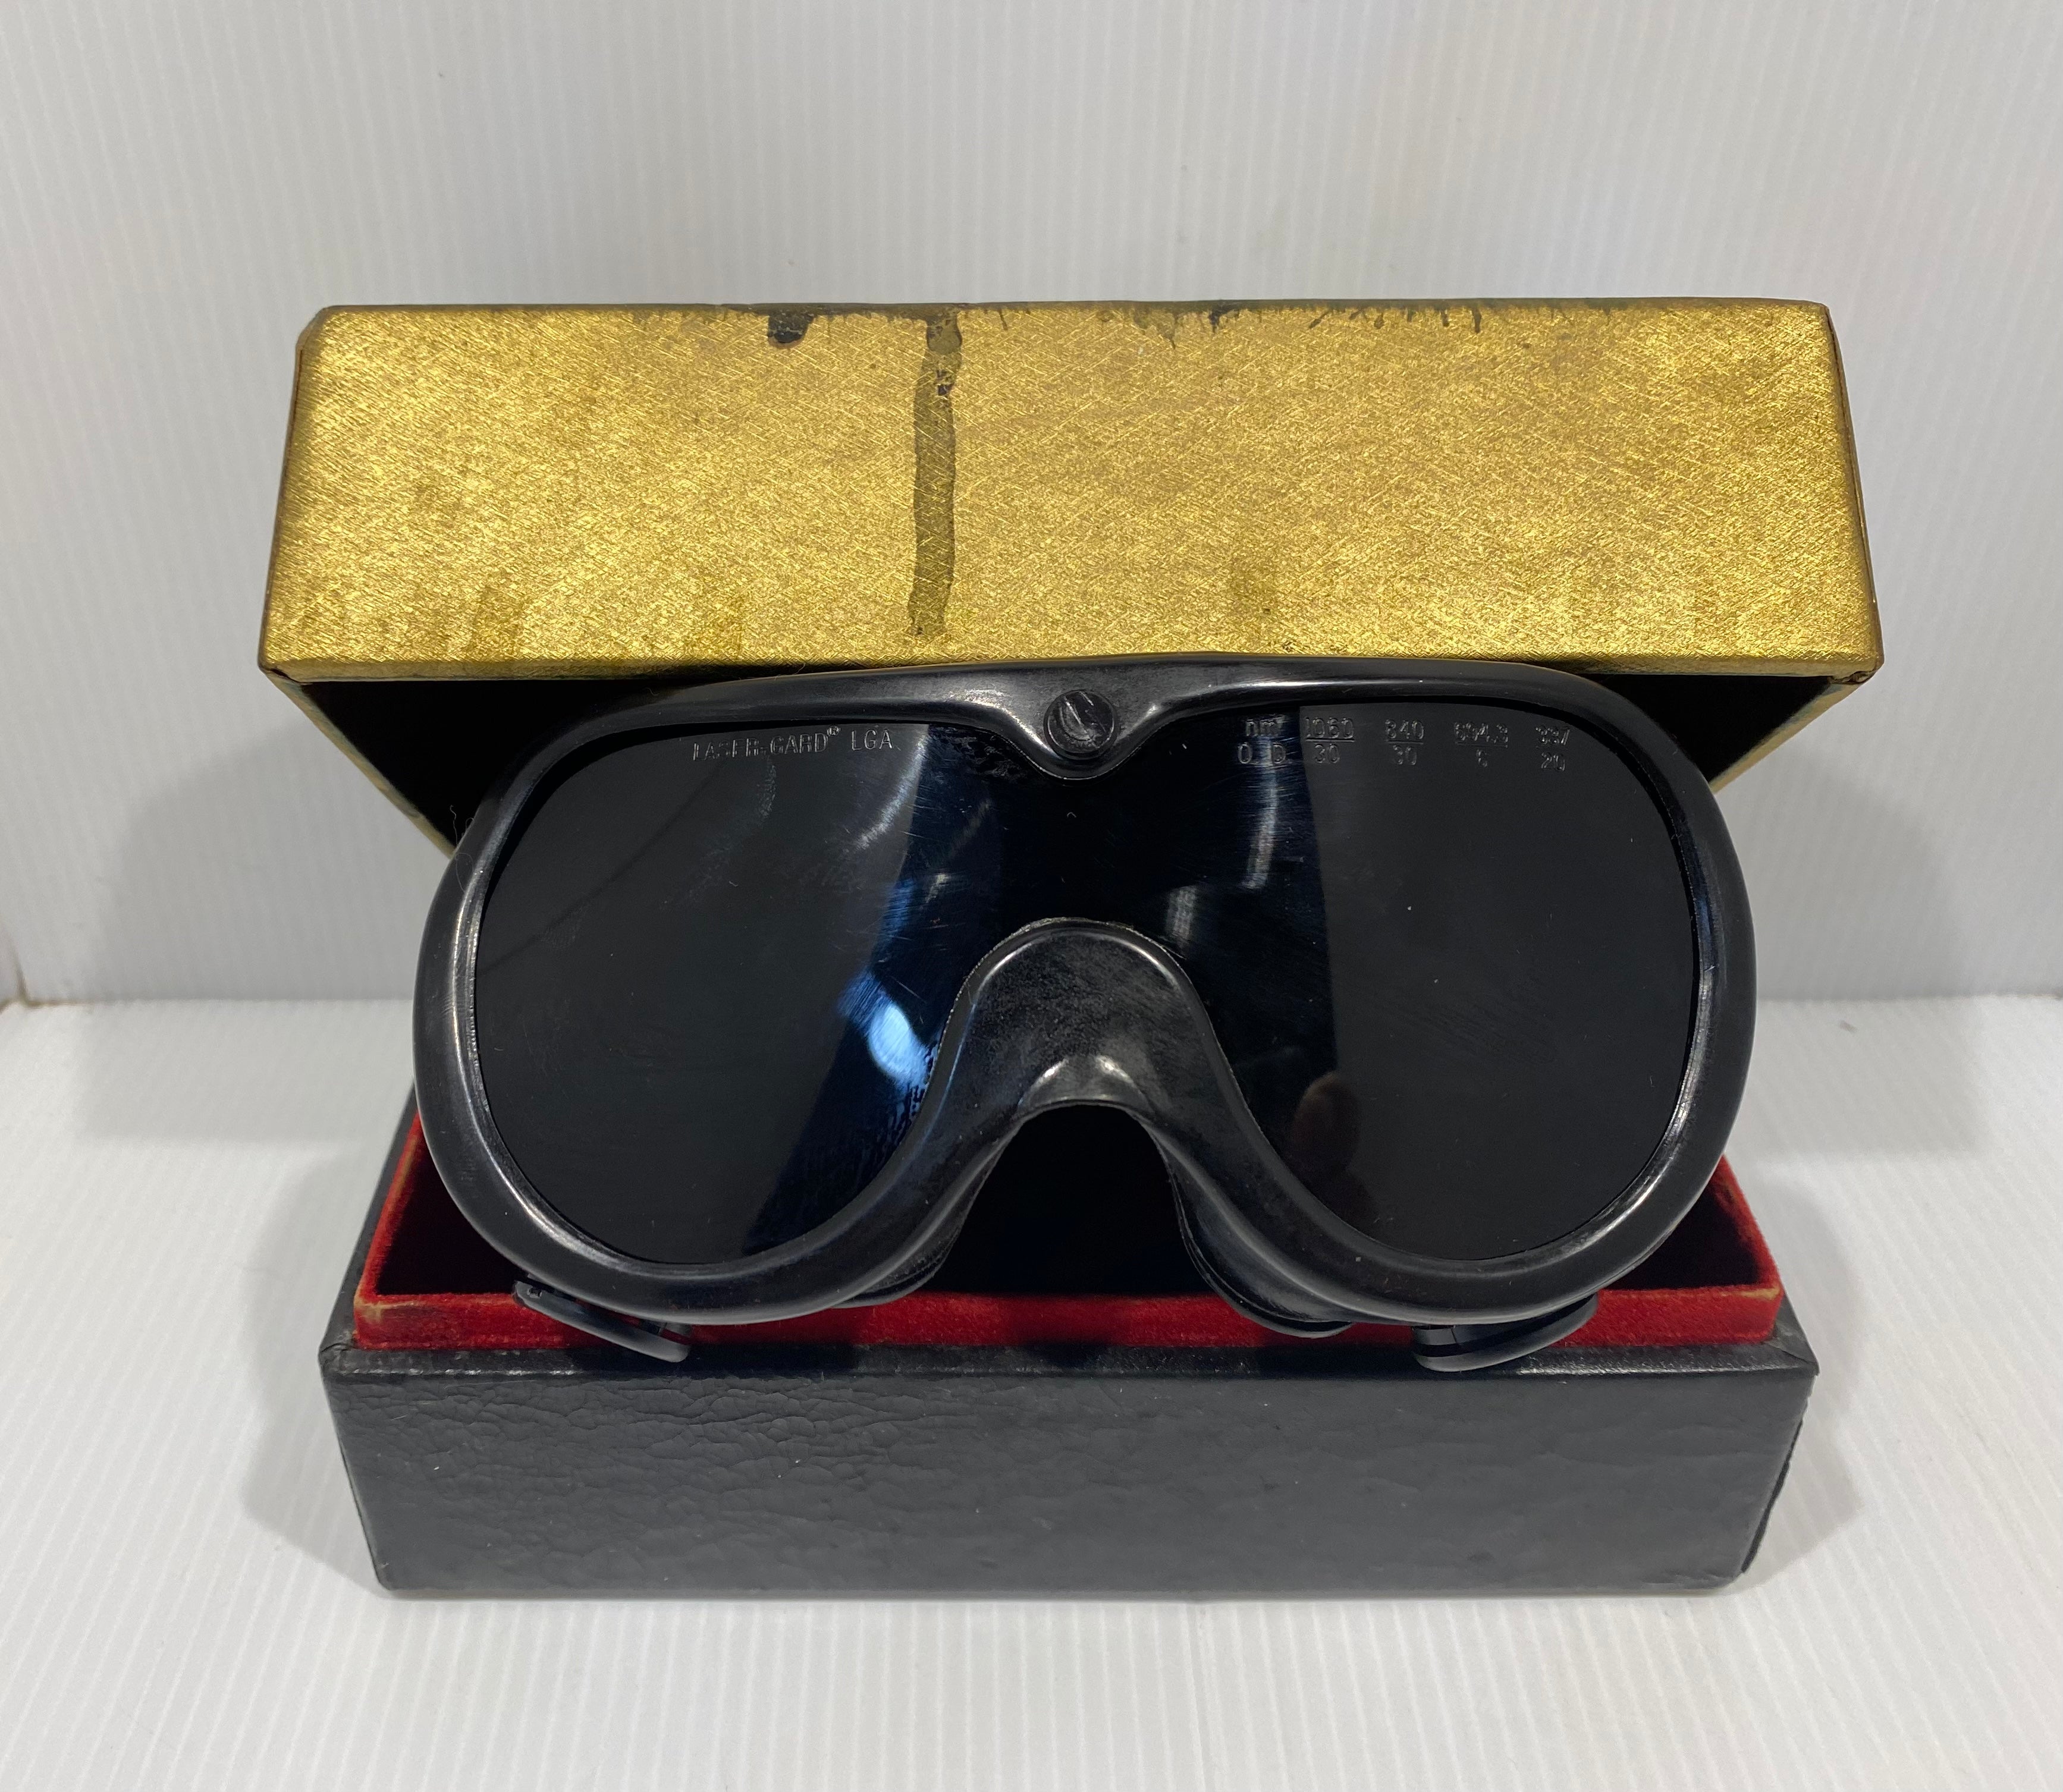 NASA Laser-Gard Safety Goggles. In the original box, Glendale Optical Co. Unused condition. Made in USA 1990s